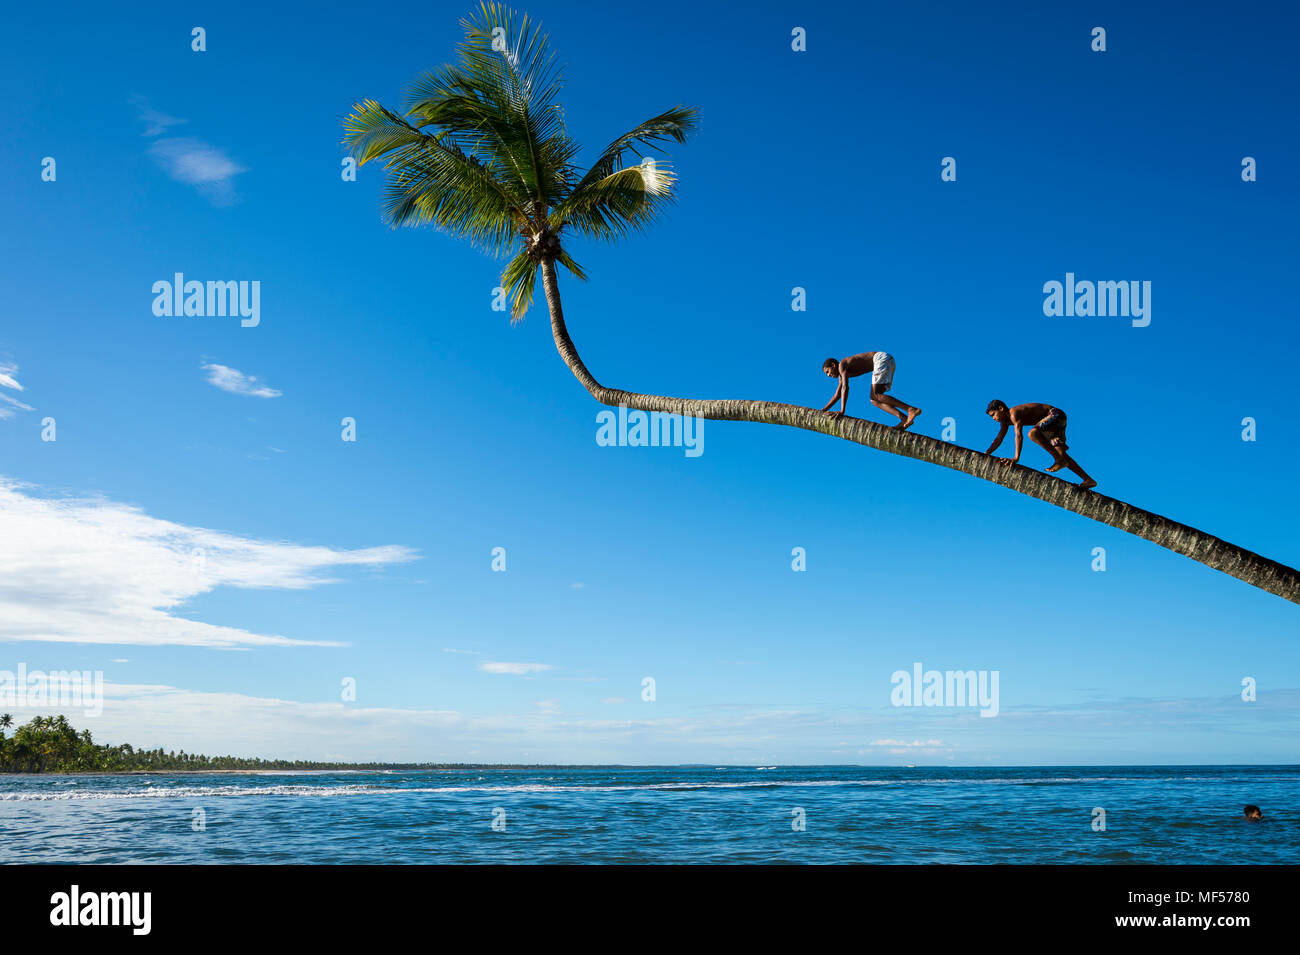 CAIRU, BRAZIL - CIRCA MARCH 2018: Young guys climb a coconut palm tree overhanging calm tropical waters at sunset. Stock Photo